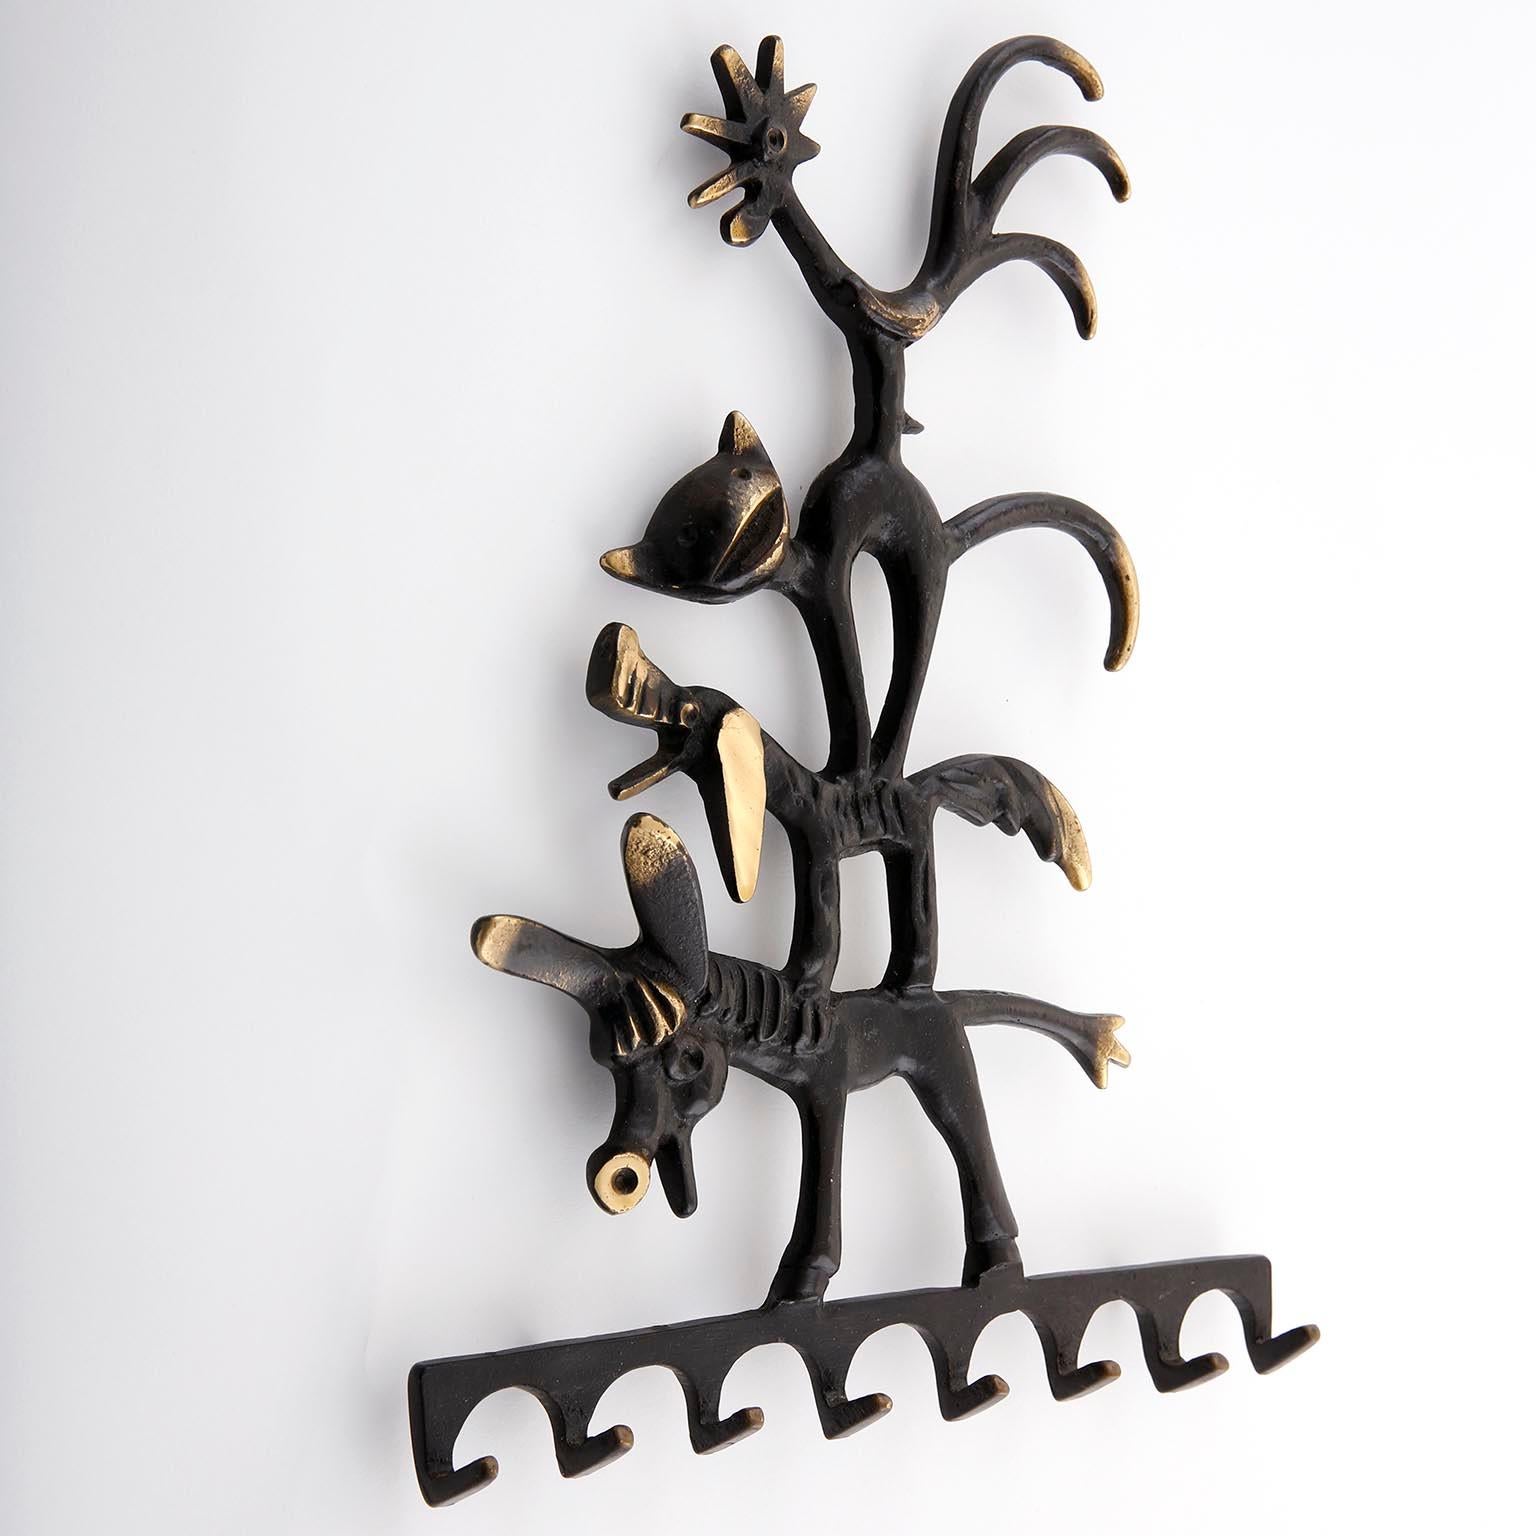 A key hanger made of made of blackened and polished brass by Walter Bosse and manufactured by Hertha Baller, Austria, Vienna, in midcentury in 1950s.
This key holder was inspired by the German myth 'Bremer Stadtmusikanten' (engl. 'Town Musicians of